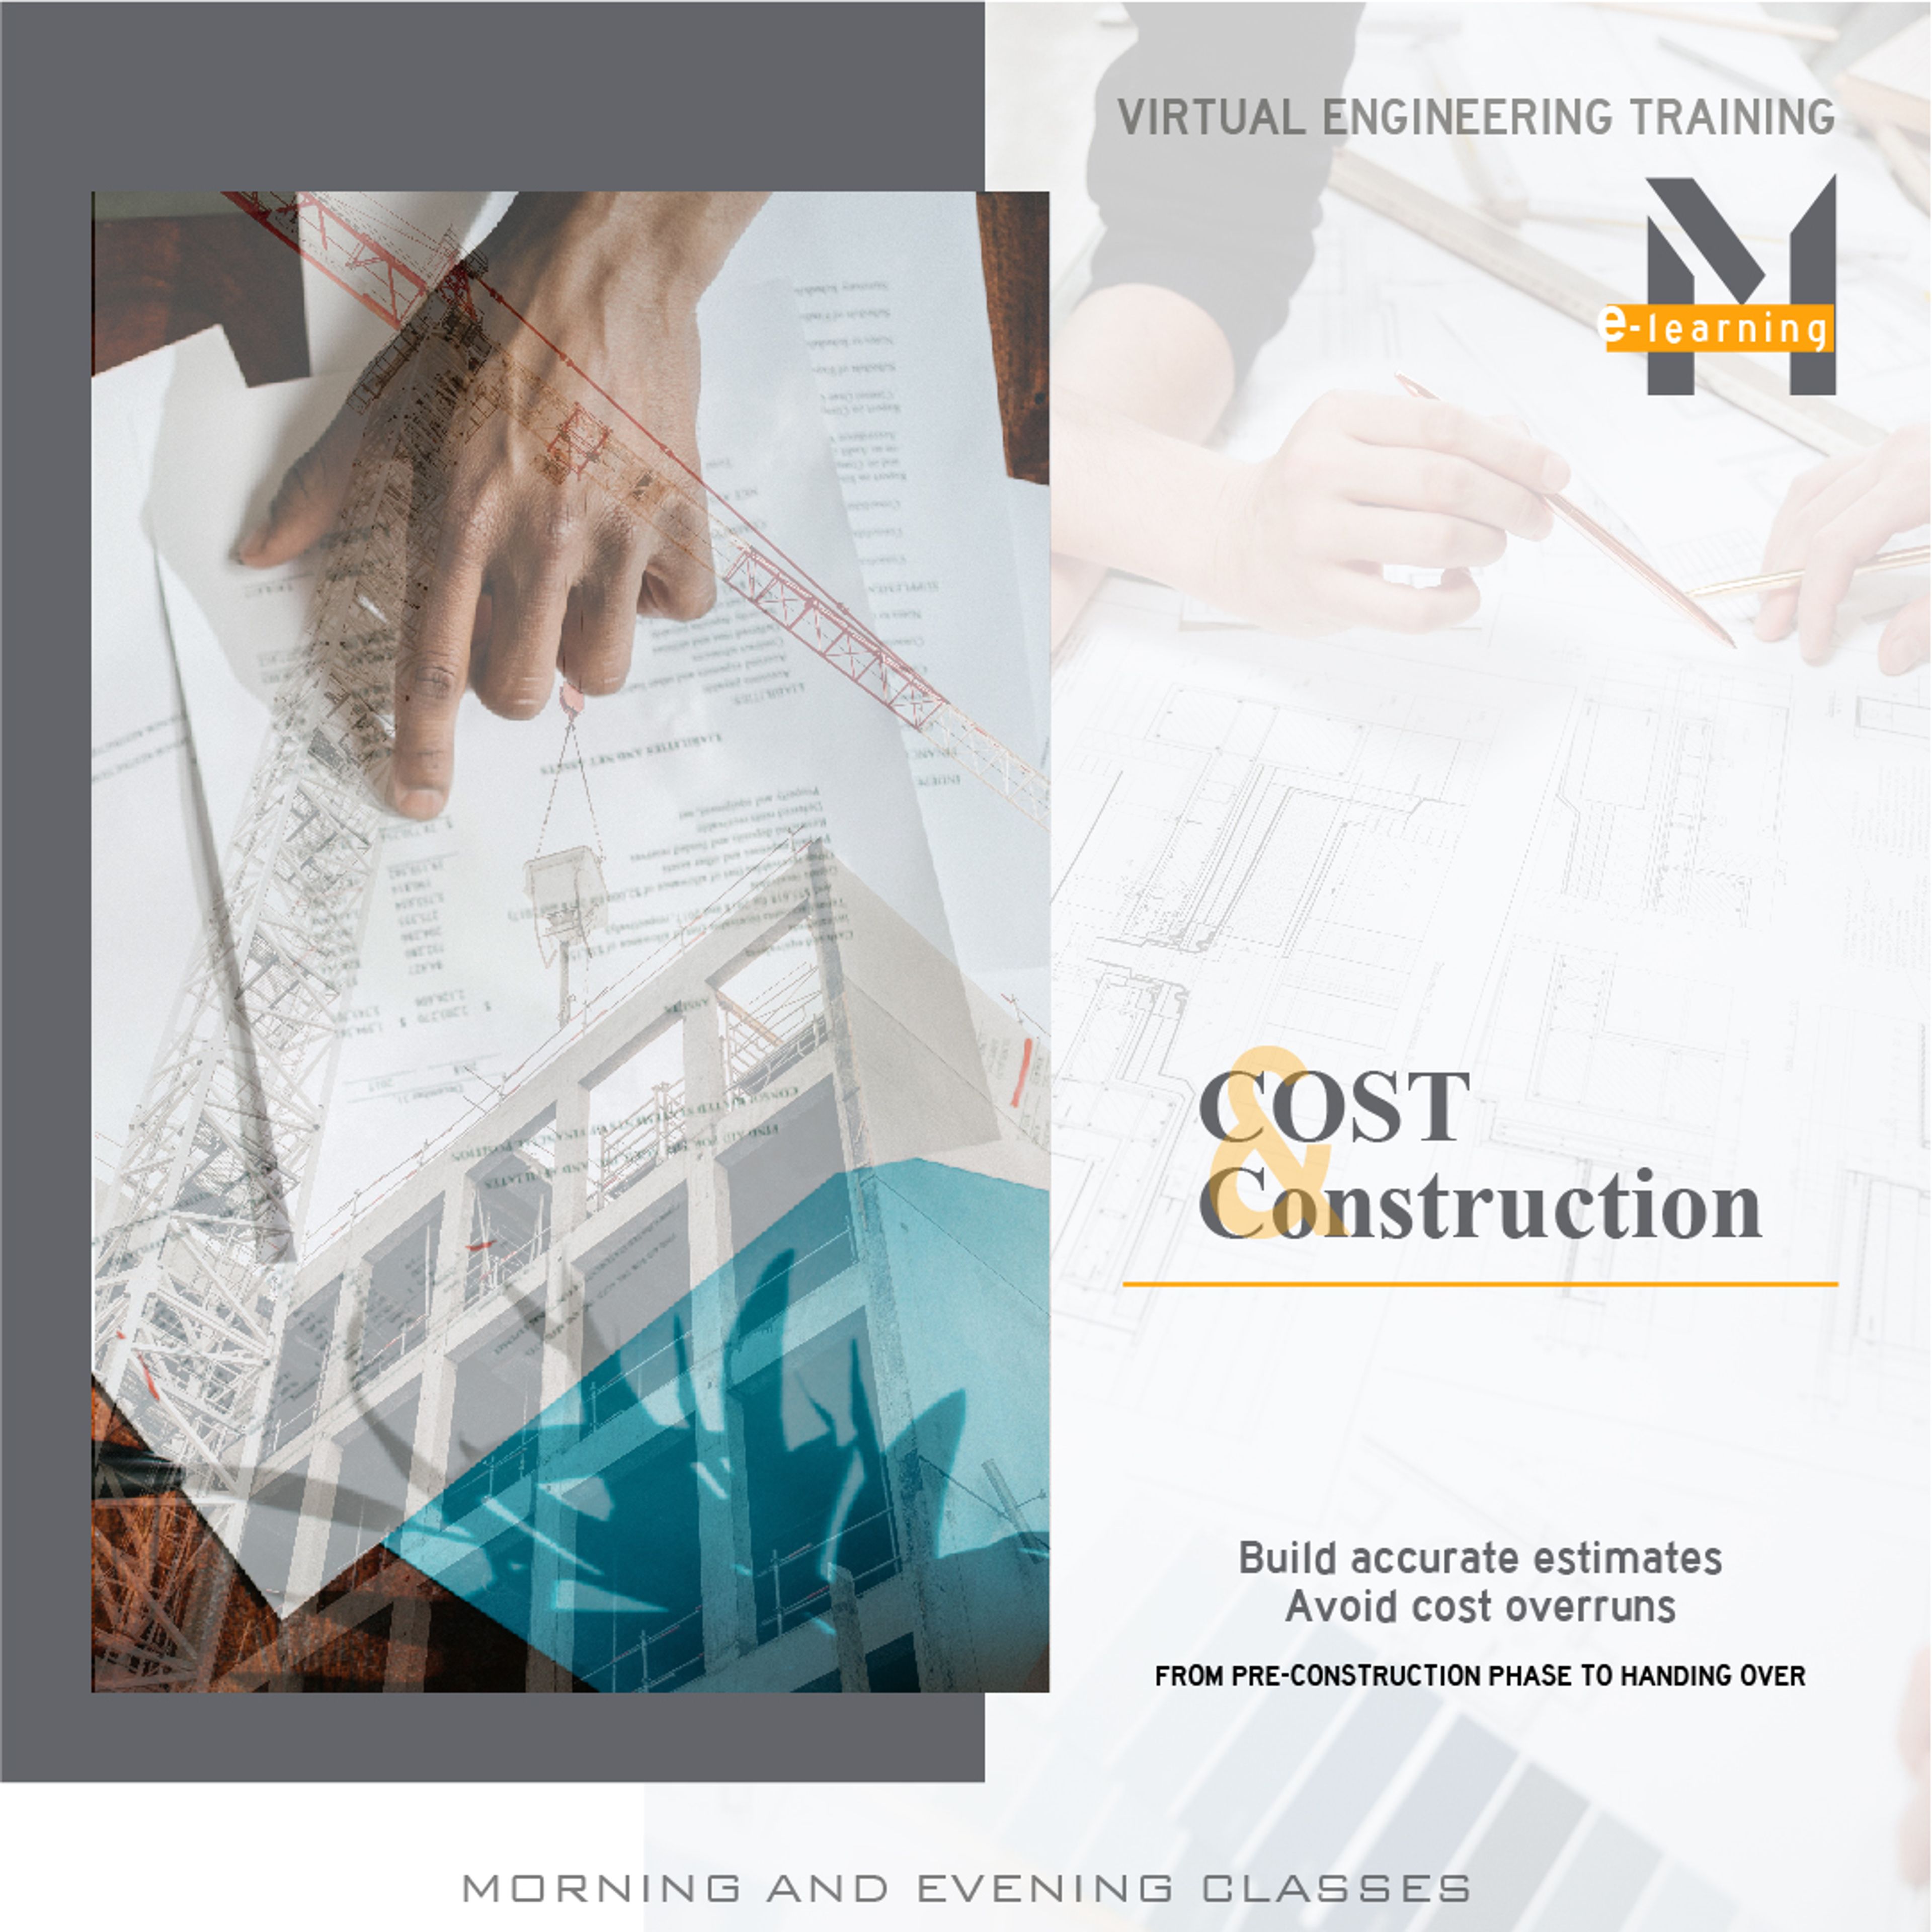 COST AND CONSTRUCTION